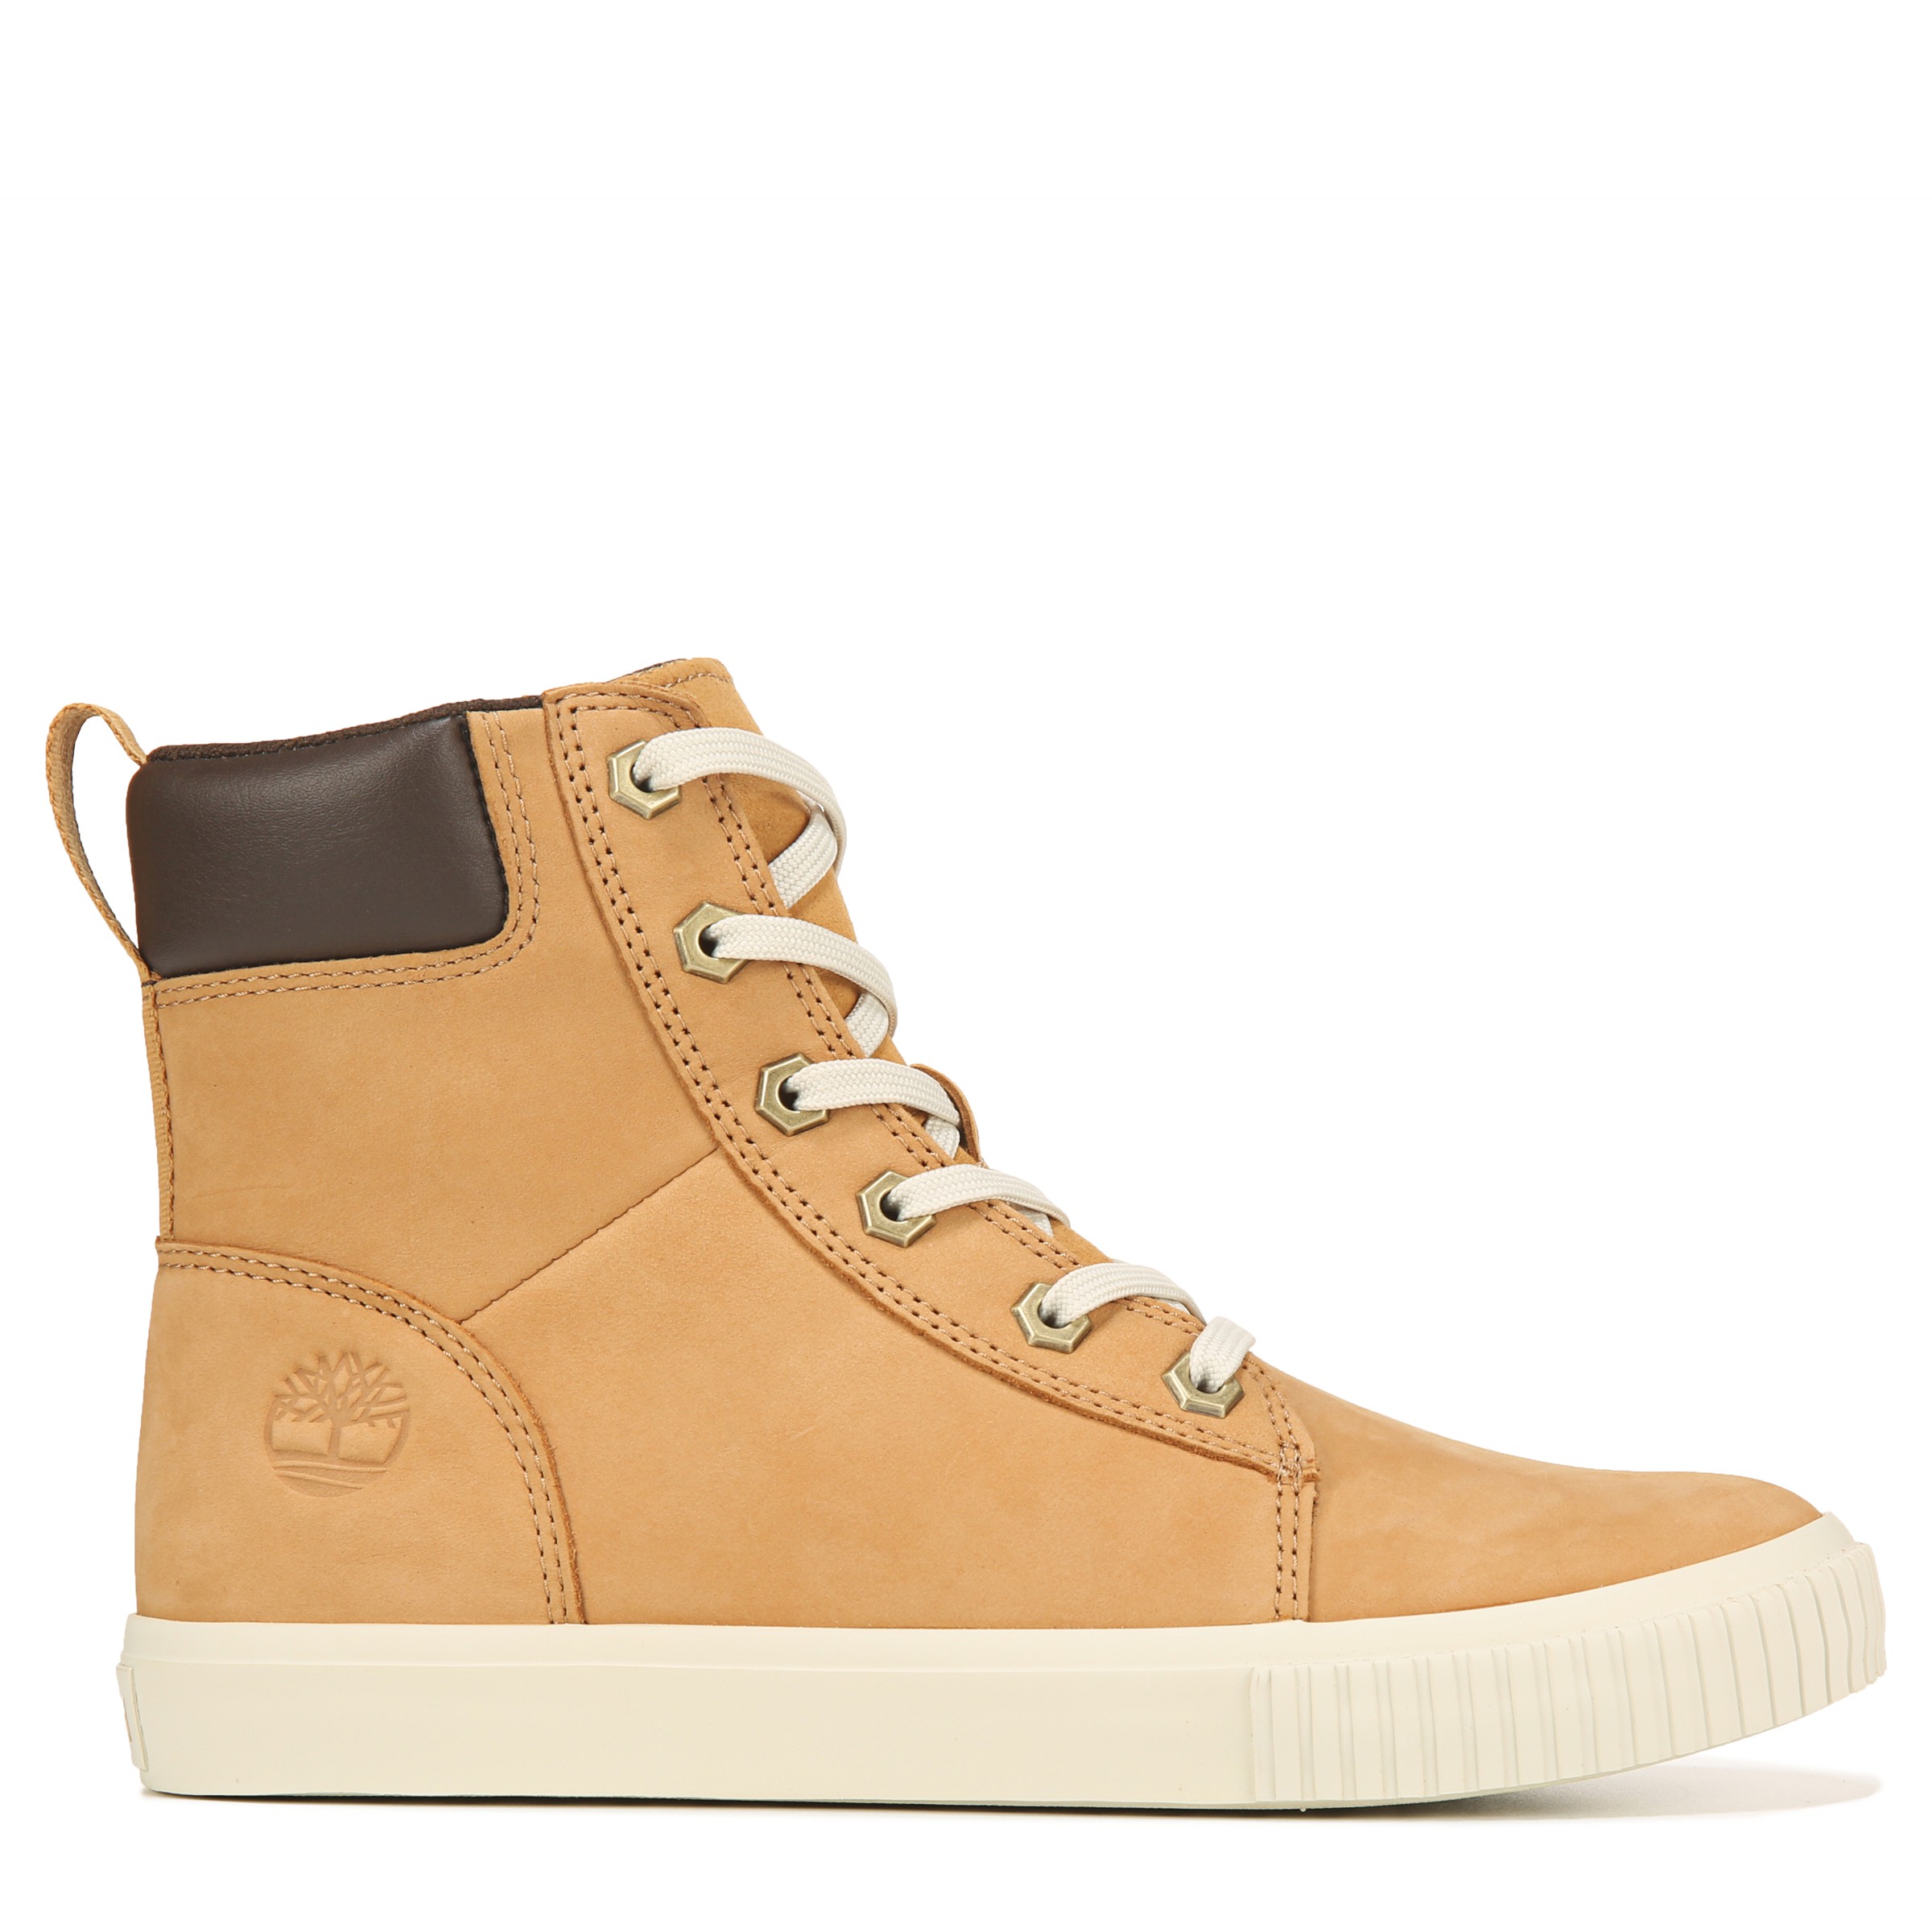 Timberland Dausette Sneaker Boot, Wheat, 5.5 : Buy Online at Best Price in  KSA - Souq is now Amazon.sa: Fashion